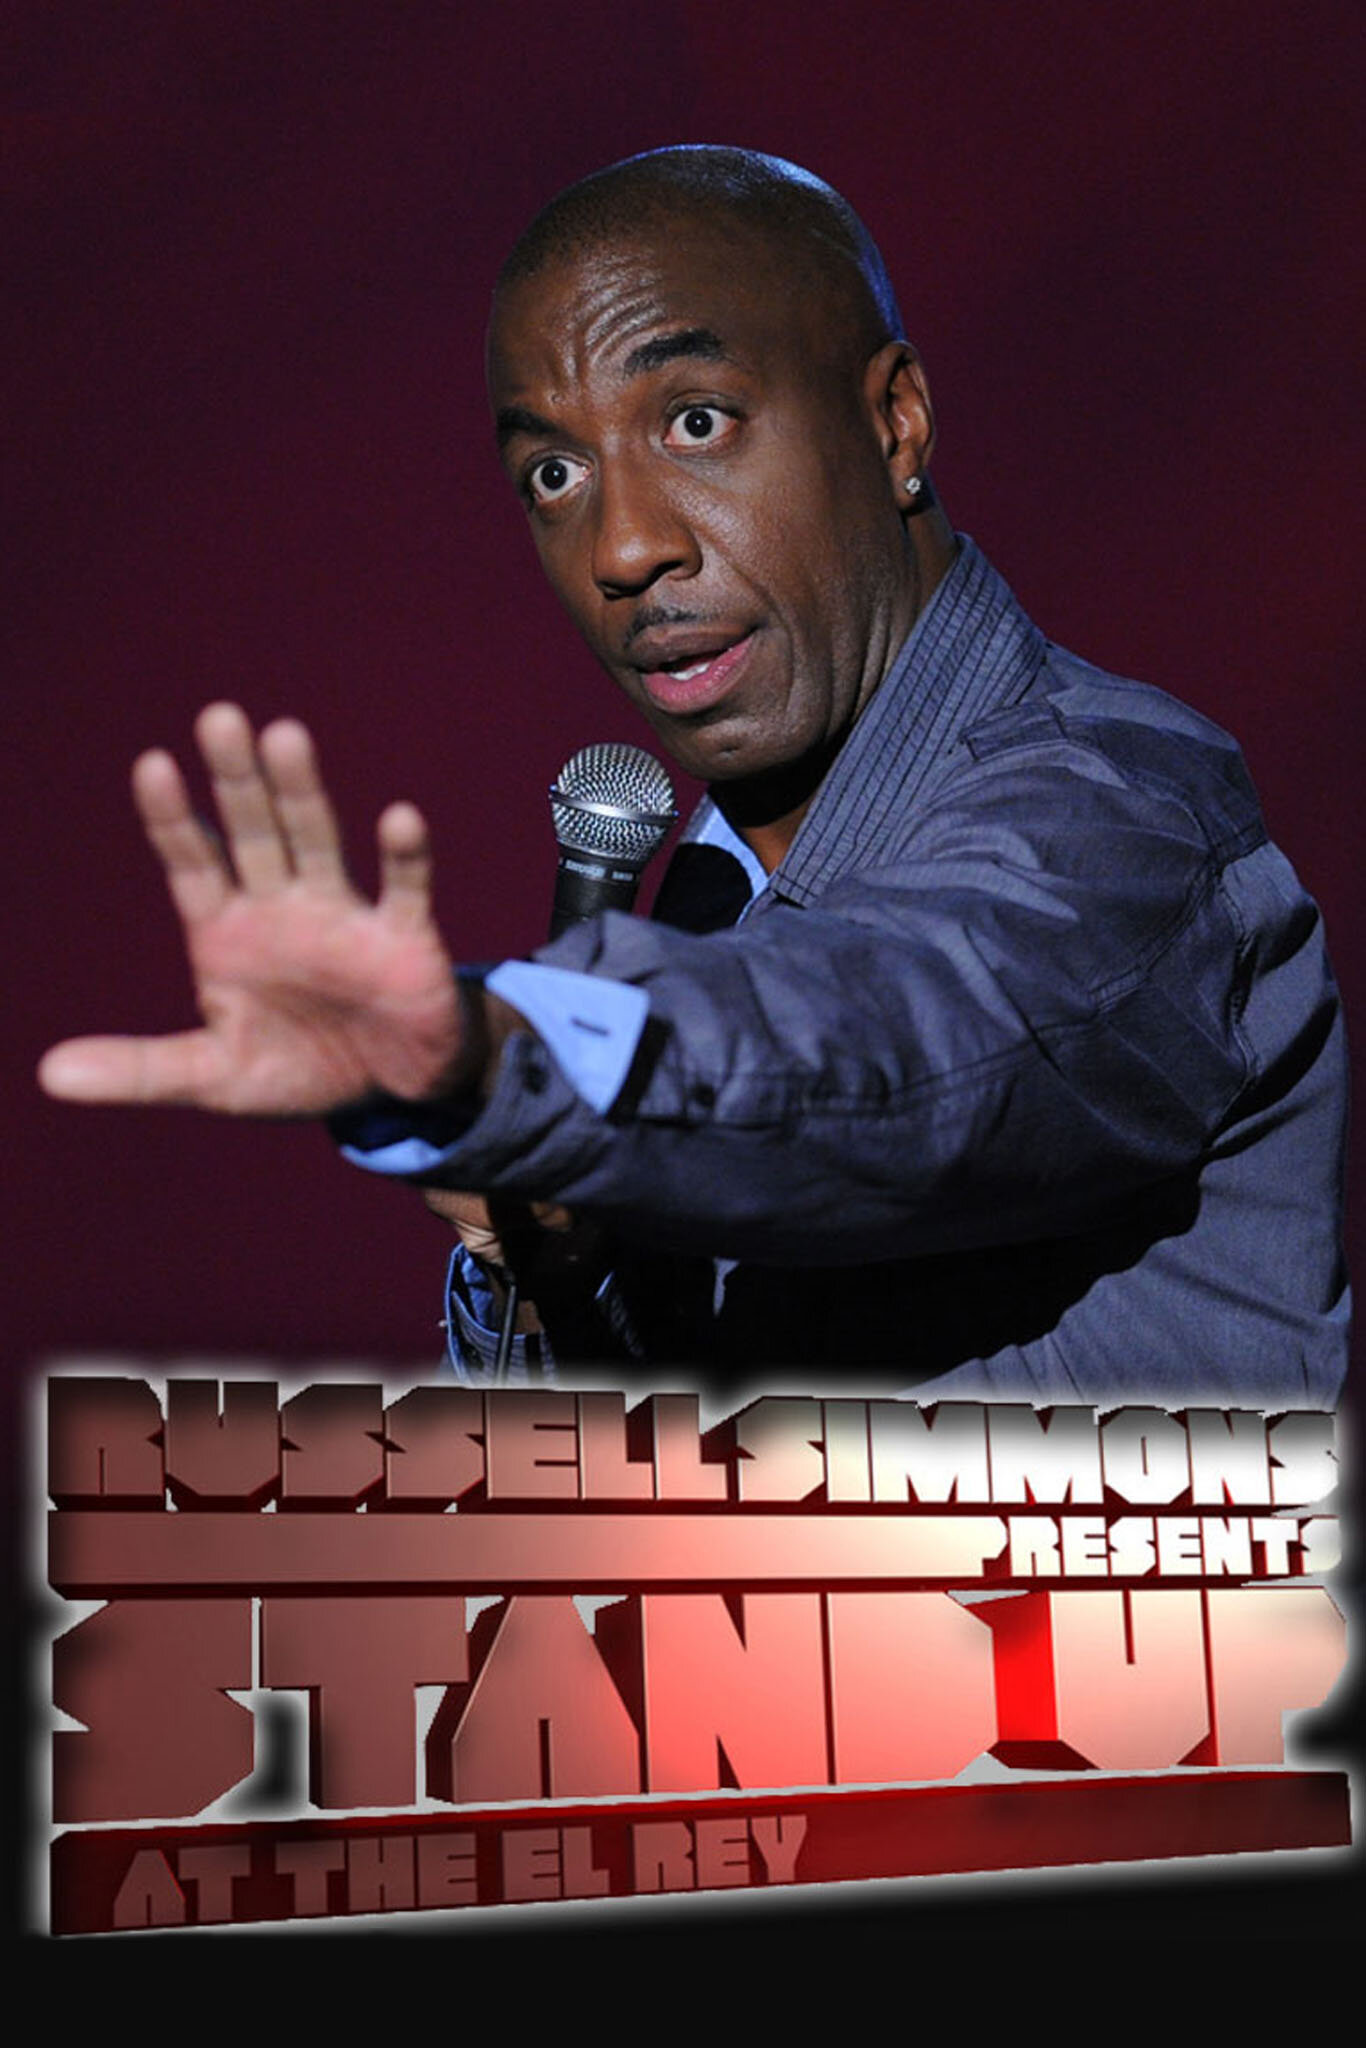 Russell Simmons Presents Stand-Up at the El Rey ne zaman